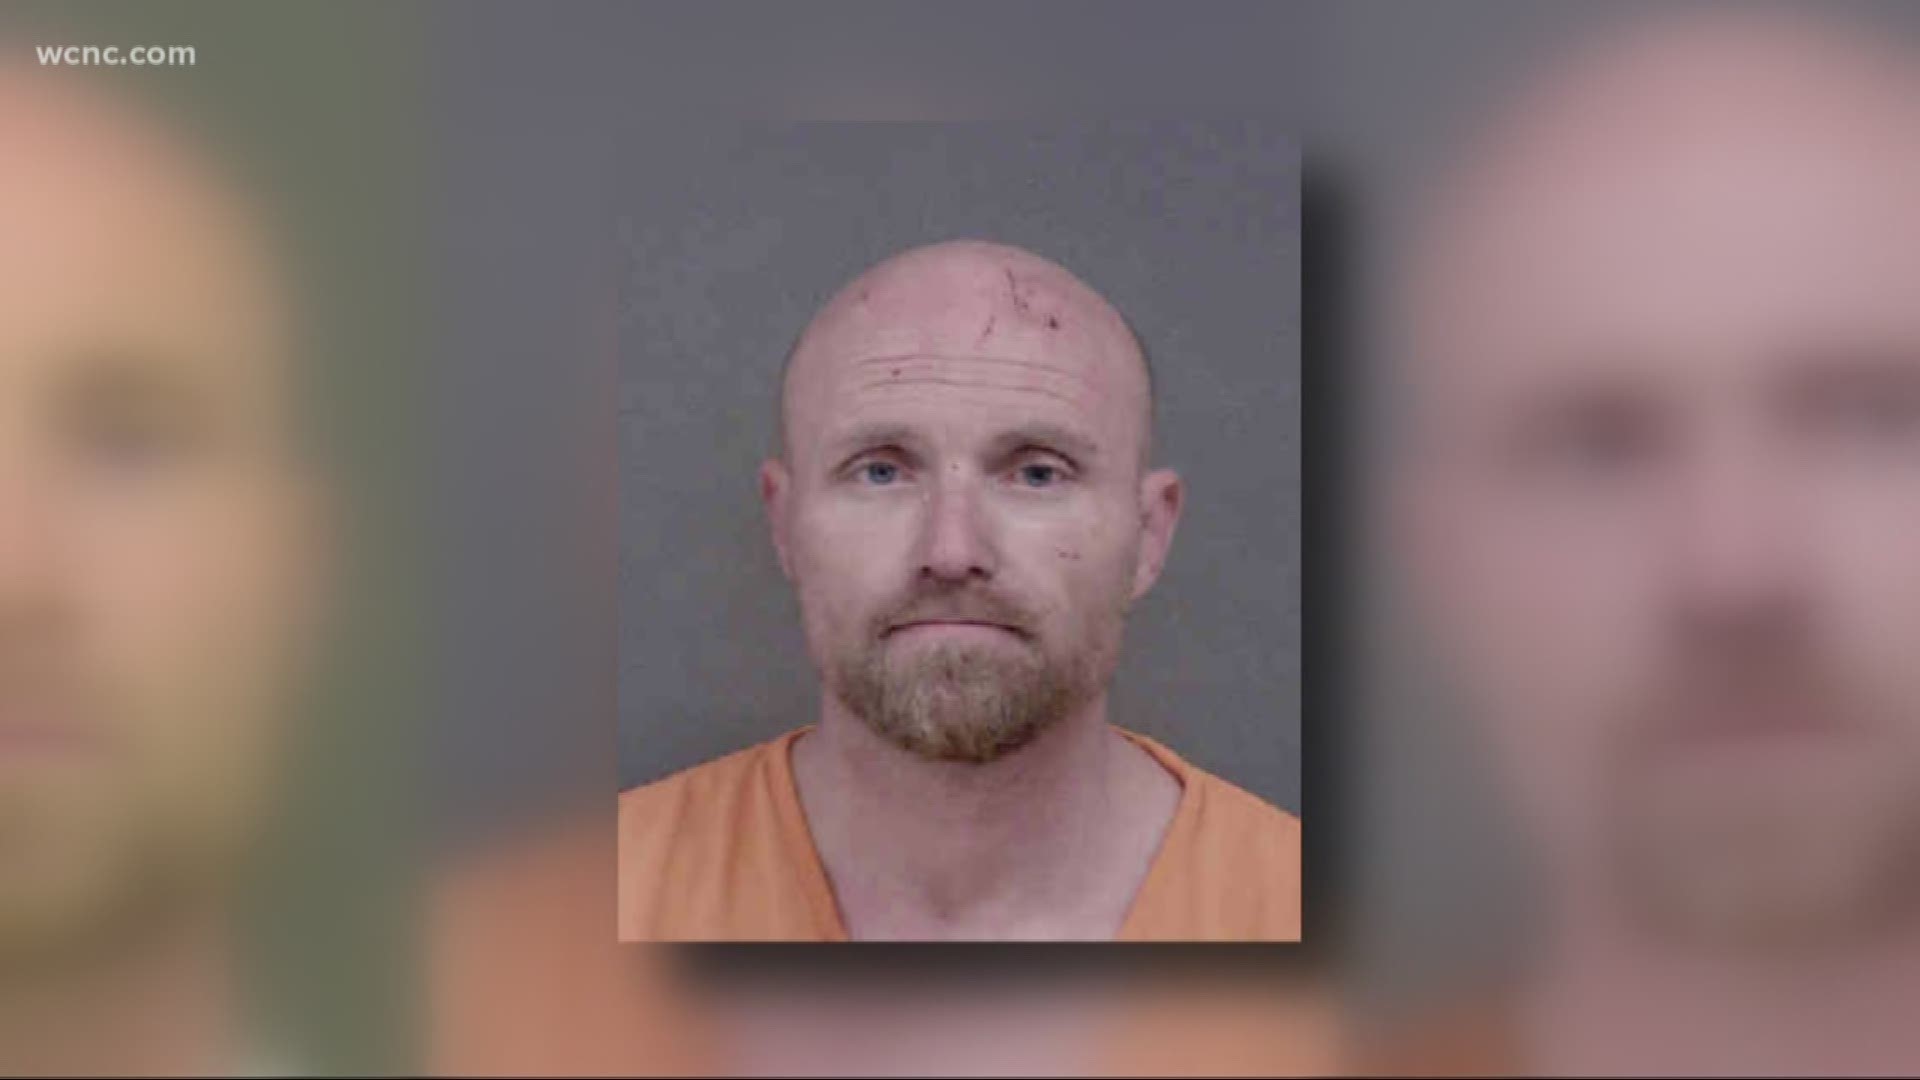 The man accused in a brutal, random attack on two innocent women over the weekend has a history of violence. Eugene Hazen got out of jail free last month, opening the door for those attacks.